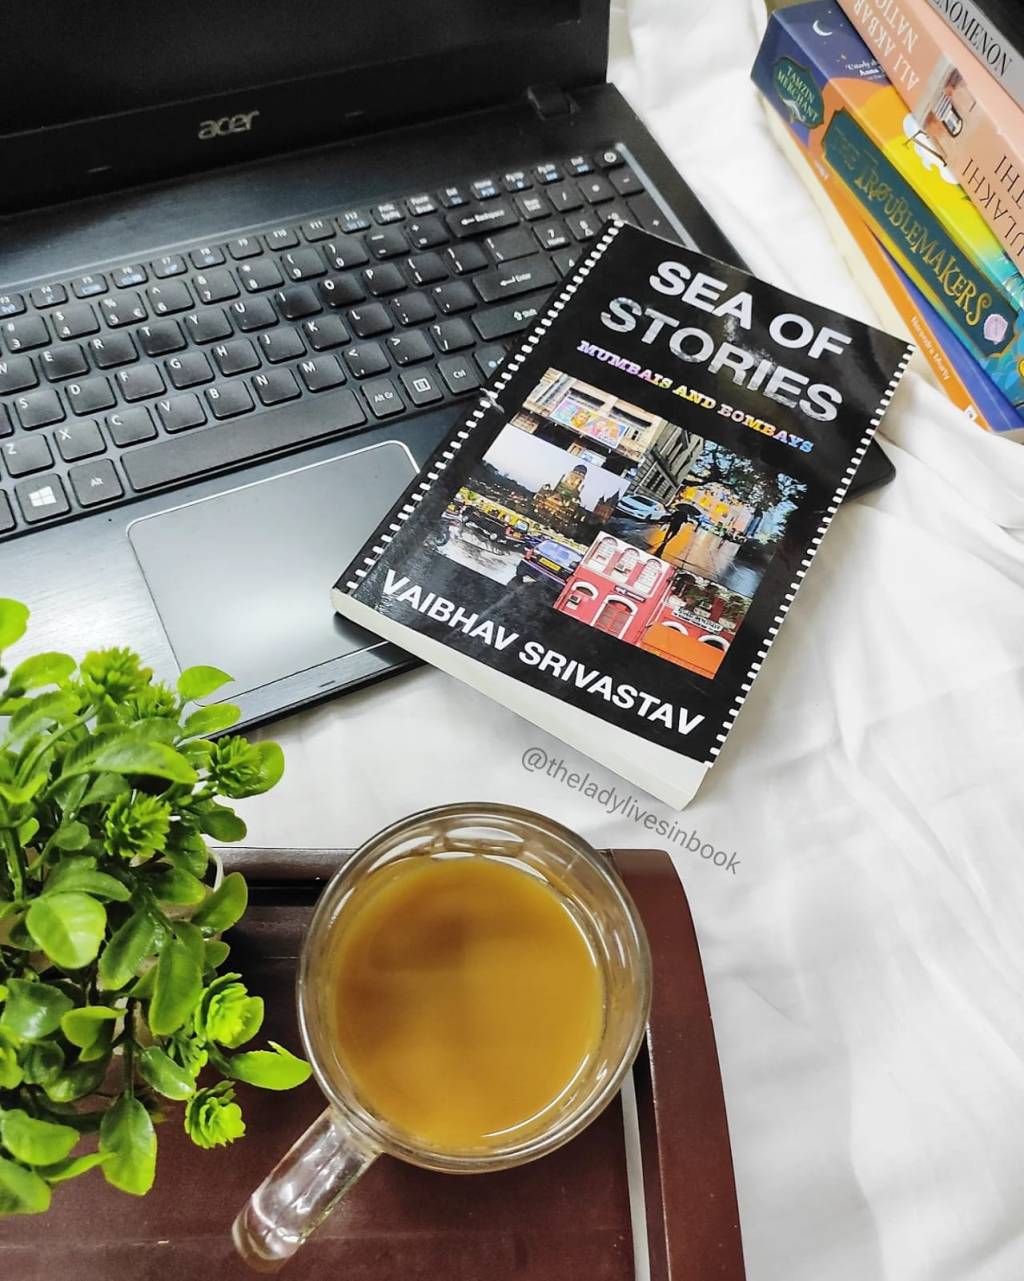 Sea Of Stories By Vaibhav Srivastav is surreal journey reflecting city life – Book Review